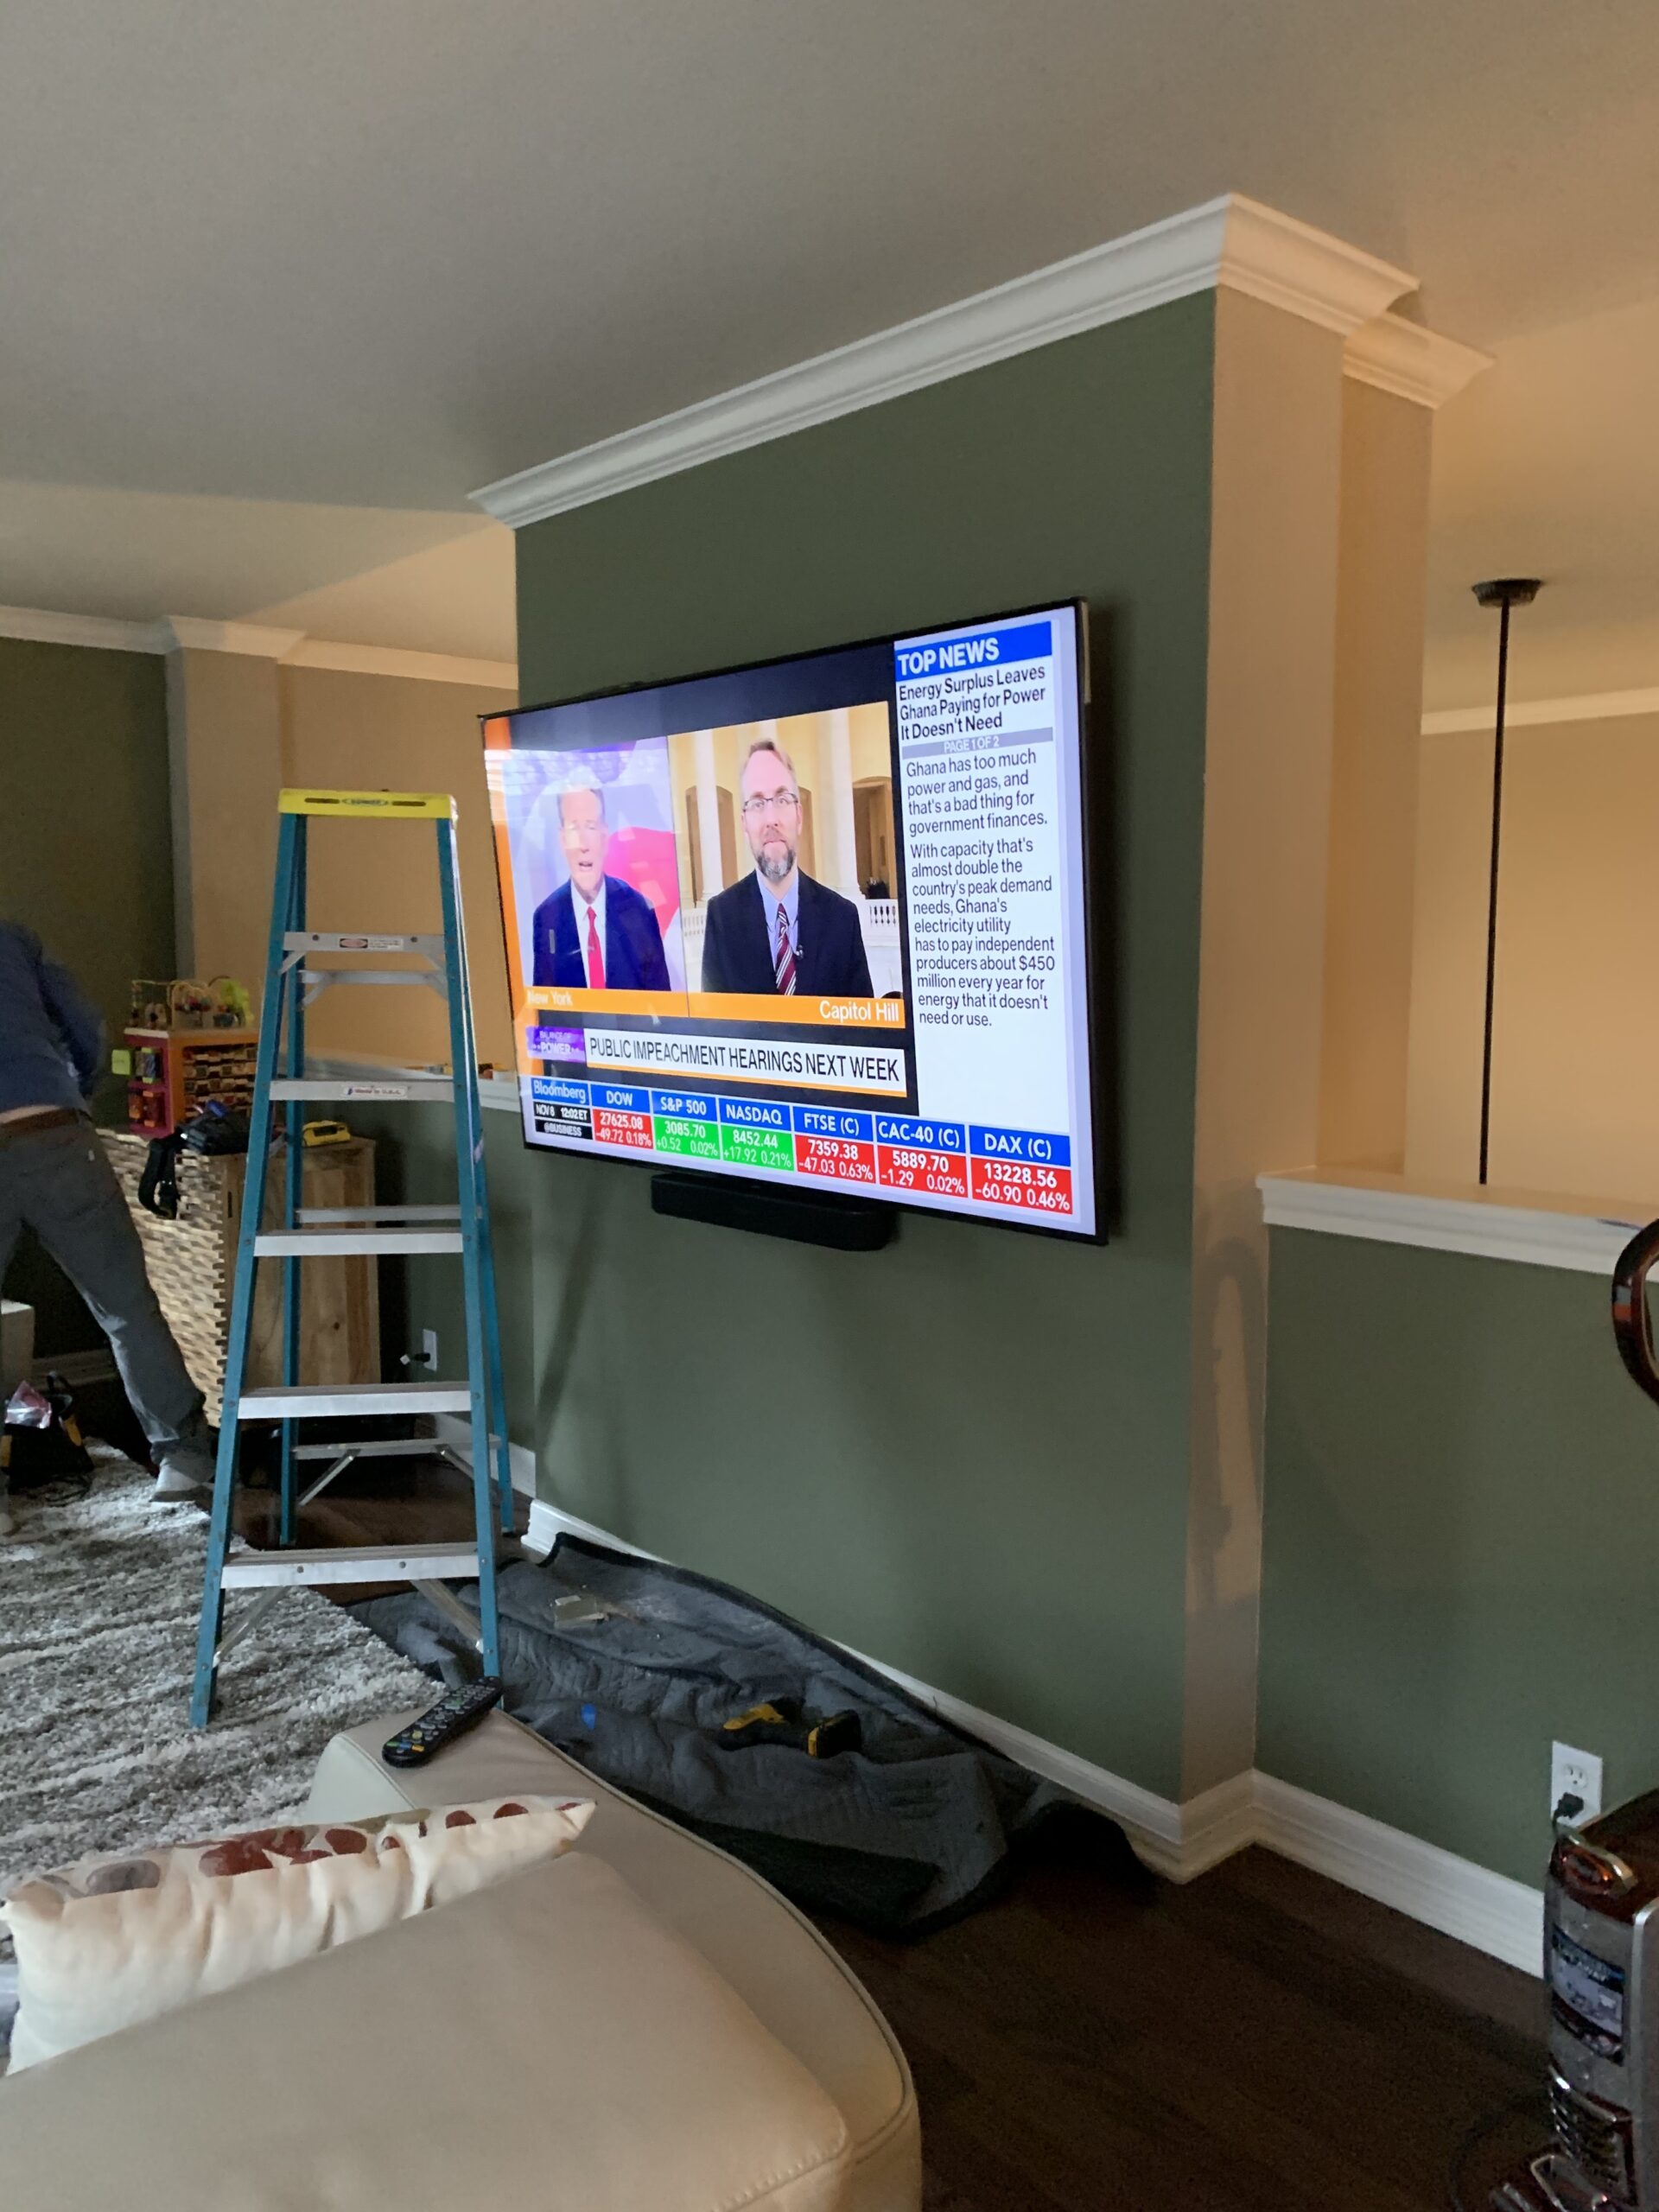 Large flat screen smart controlled TV mounted on wall